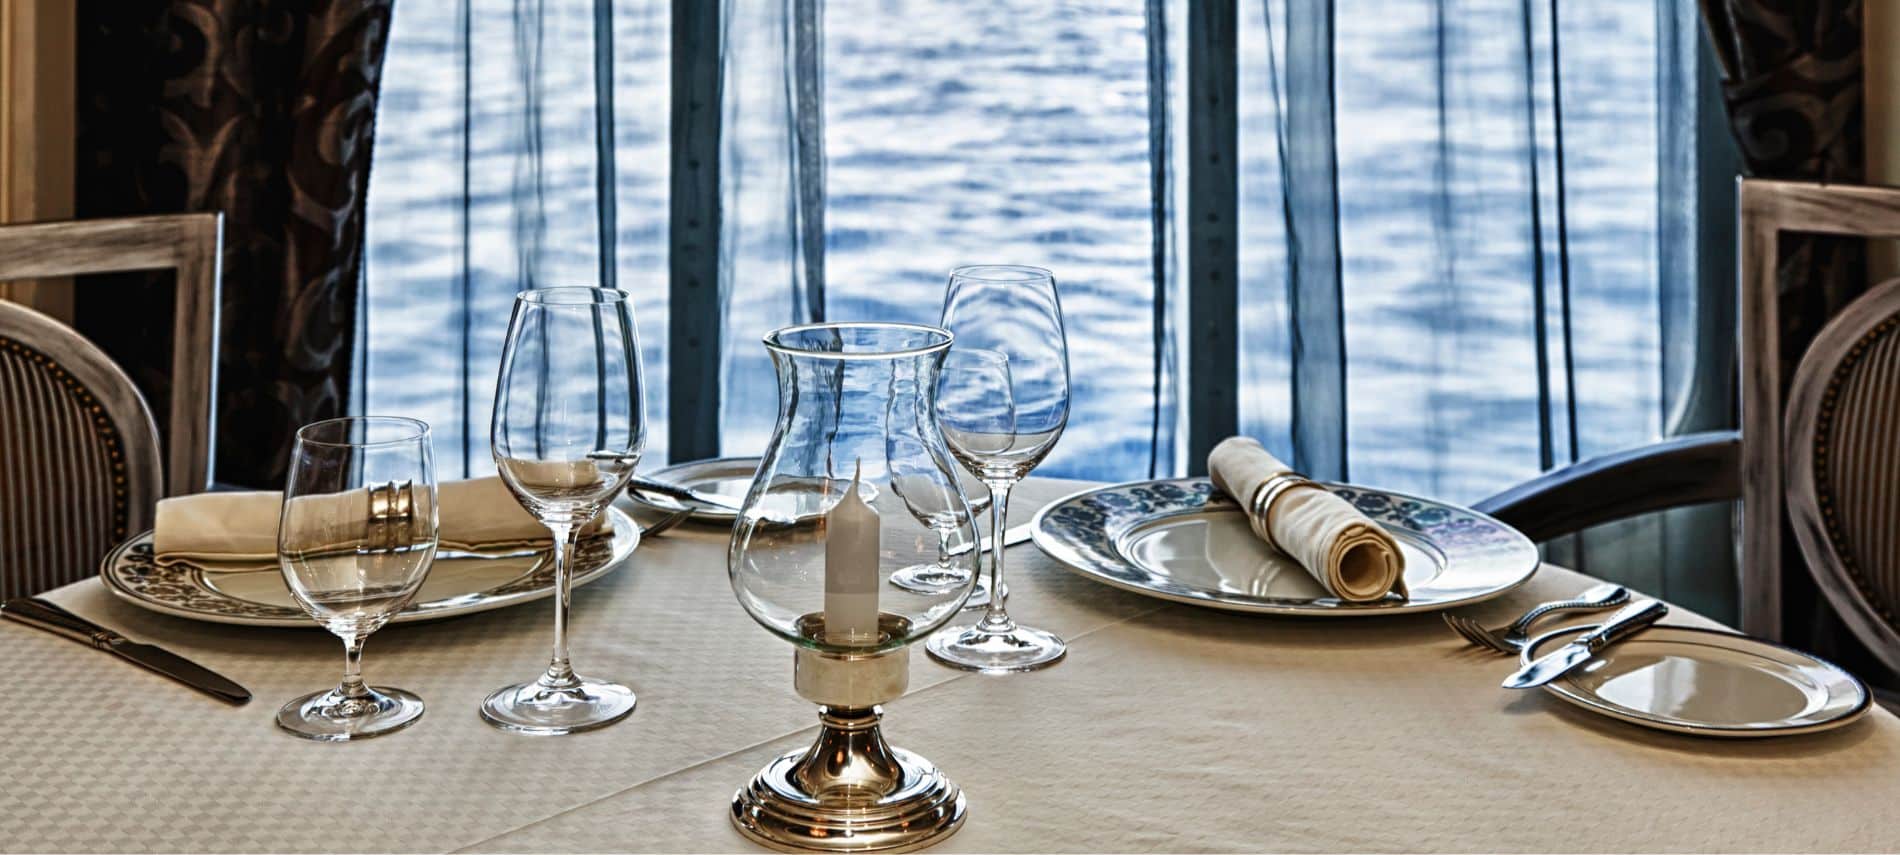 Dining table set in a waterside restaurant